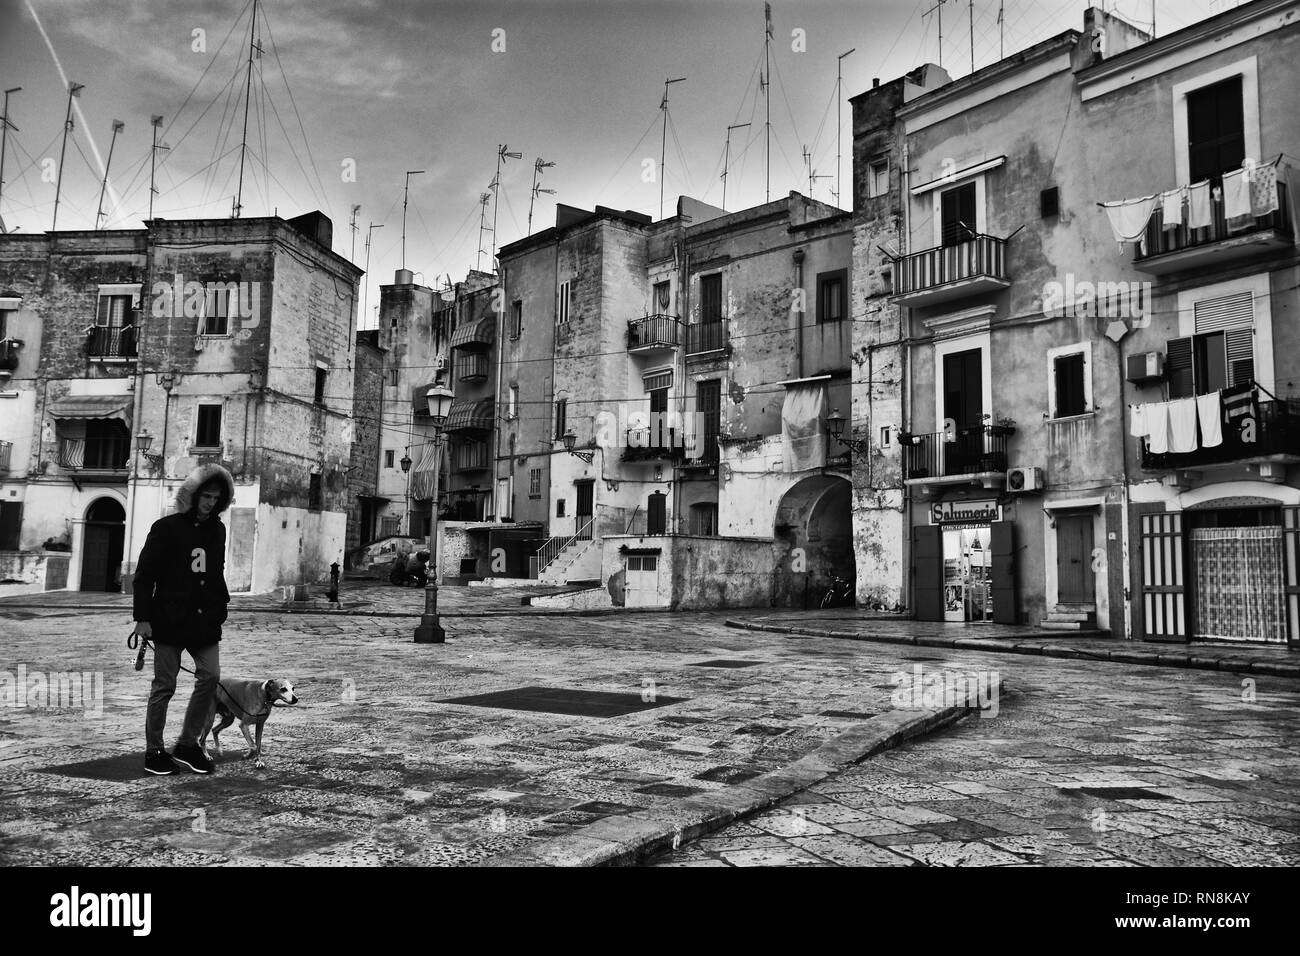 BARI, ITALY - FEBRUARY 8, 2019. Night cityscape  in the Old Town , historical center of Bari , Italy. Man and dog passing. Black and white image. Stock Photo